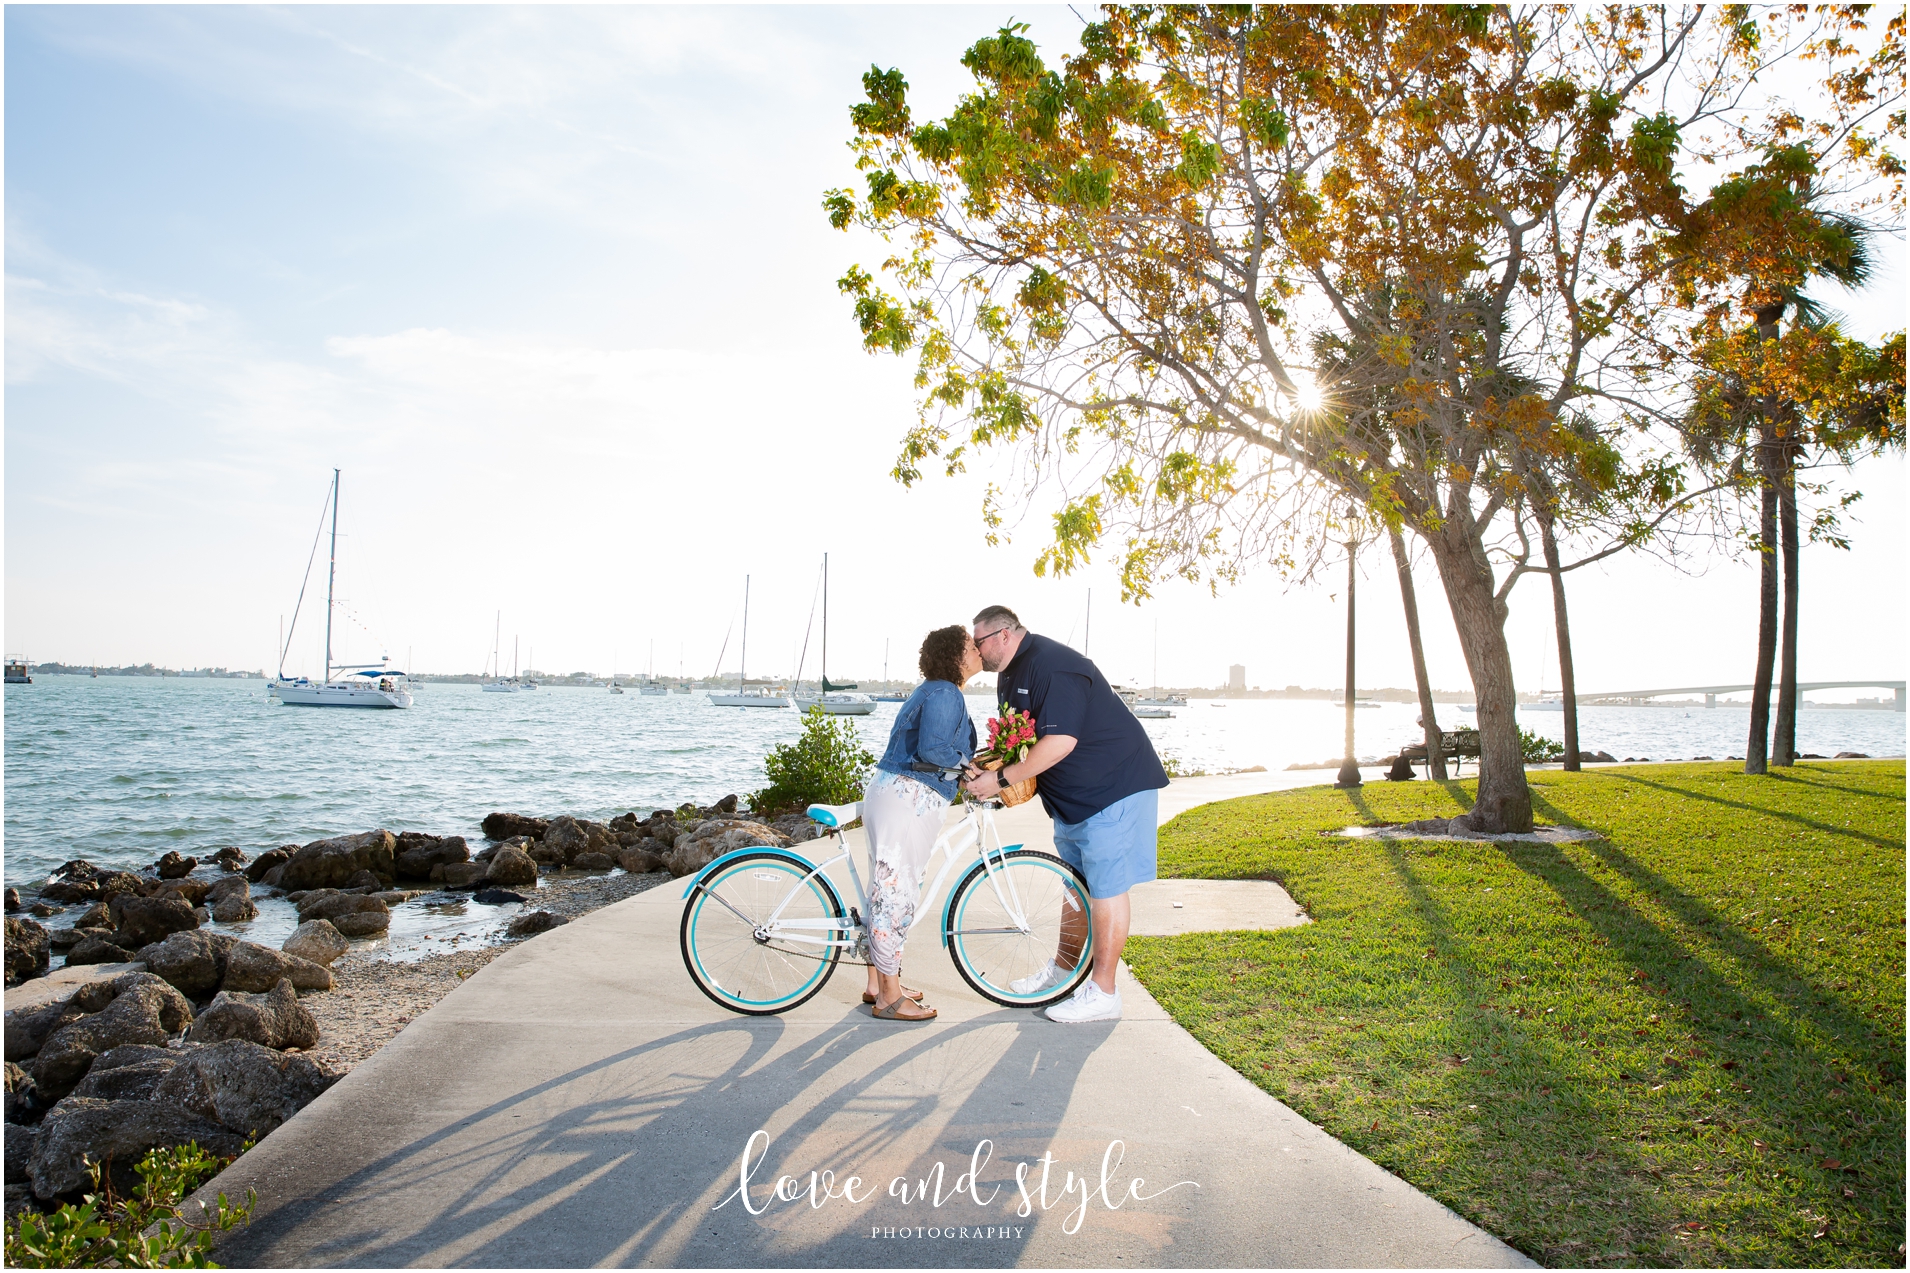 Engagement Photographer Sarasota at Bayfront Park and Marina with couple kissing on a bike